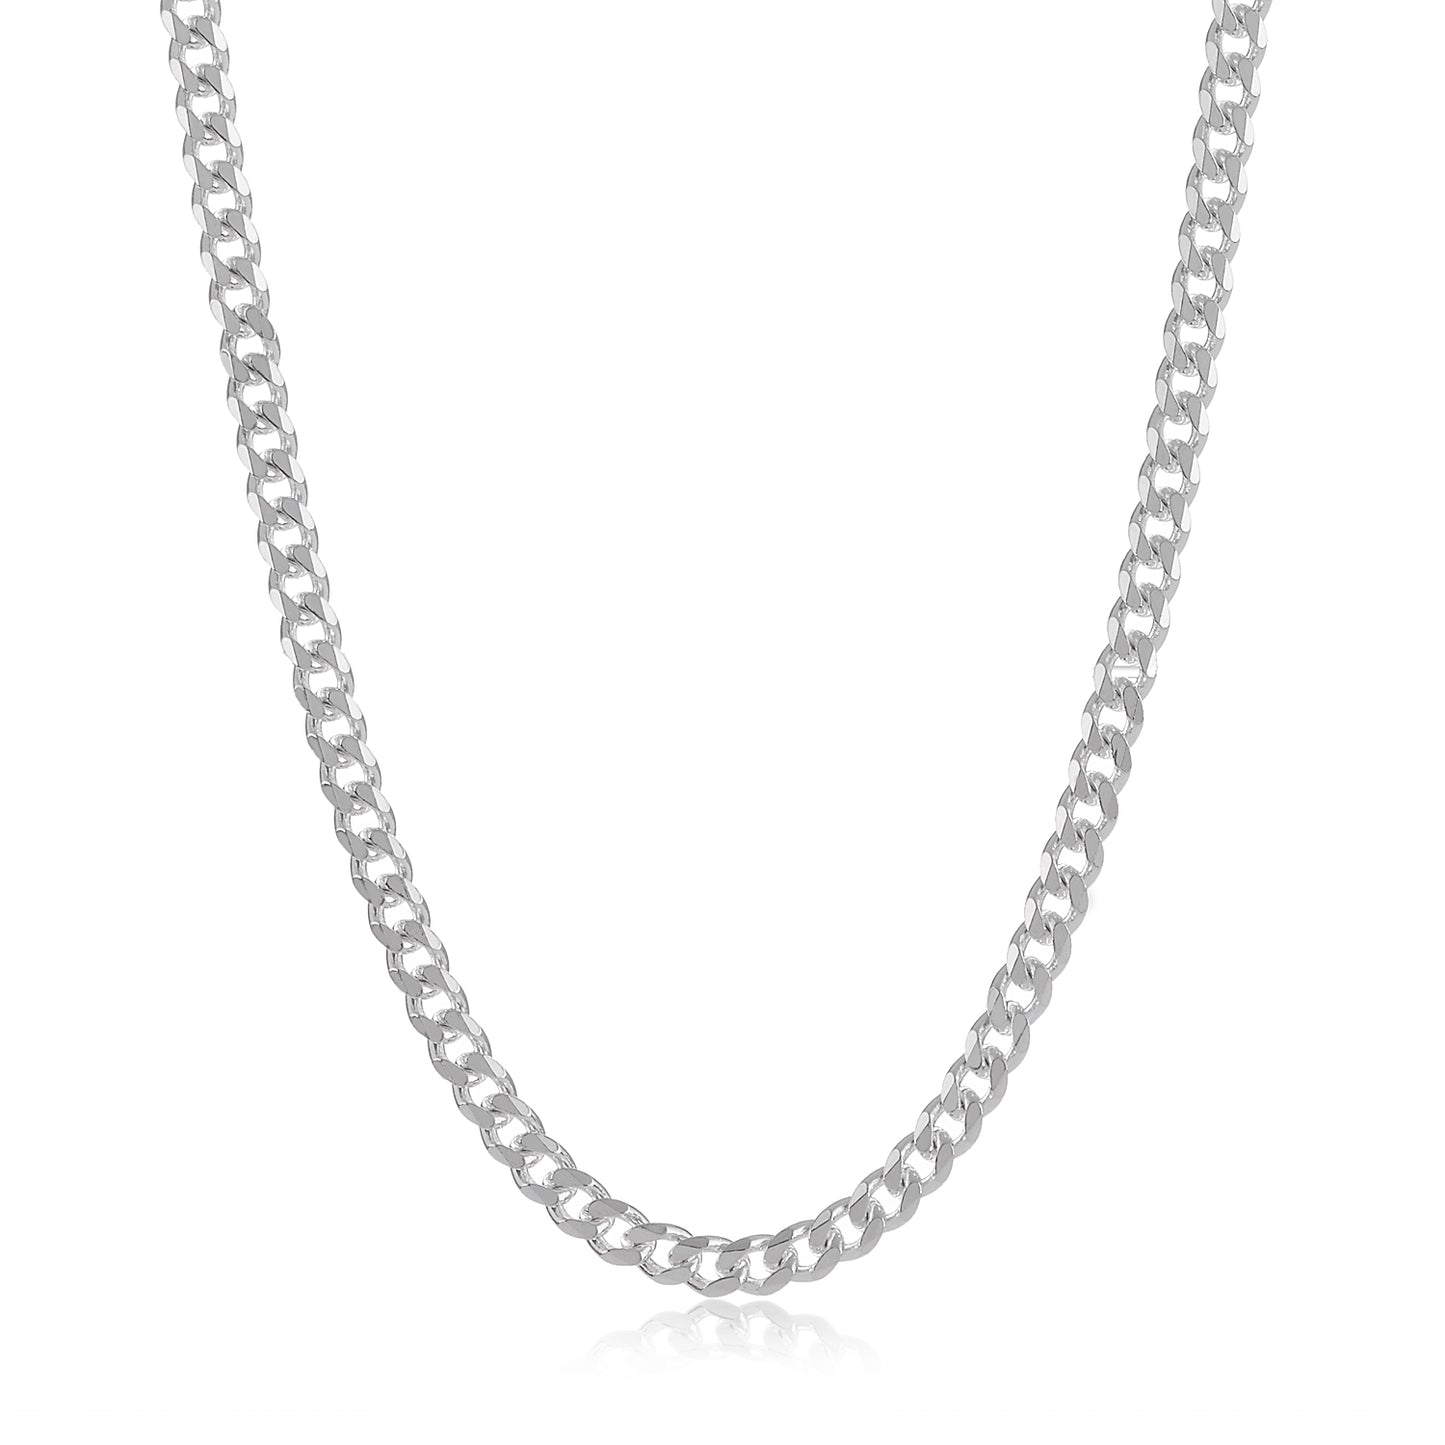 3mm High-Polished .925 Sterling Silver (Nickel Free) Flat Beveled Curb Chain Necklace, 7'-40' + Jewelry Cloth & Pouch (SKU: NC1007)